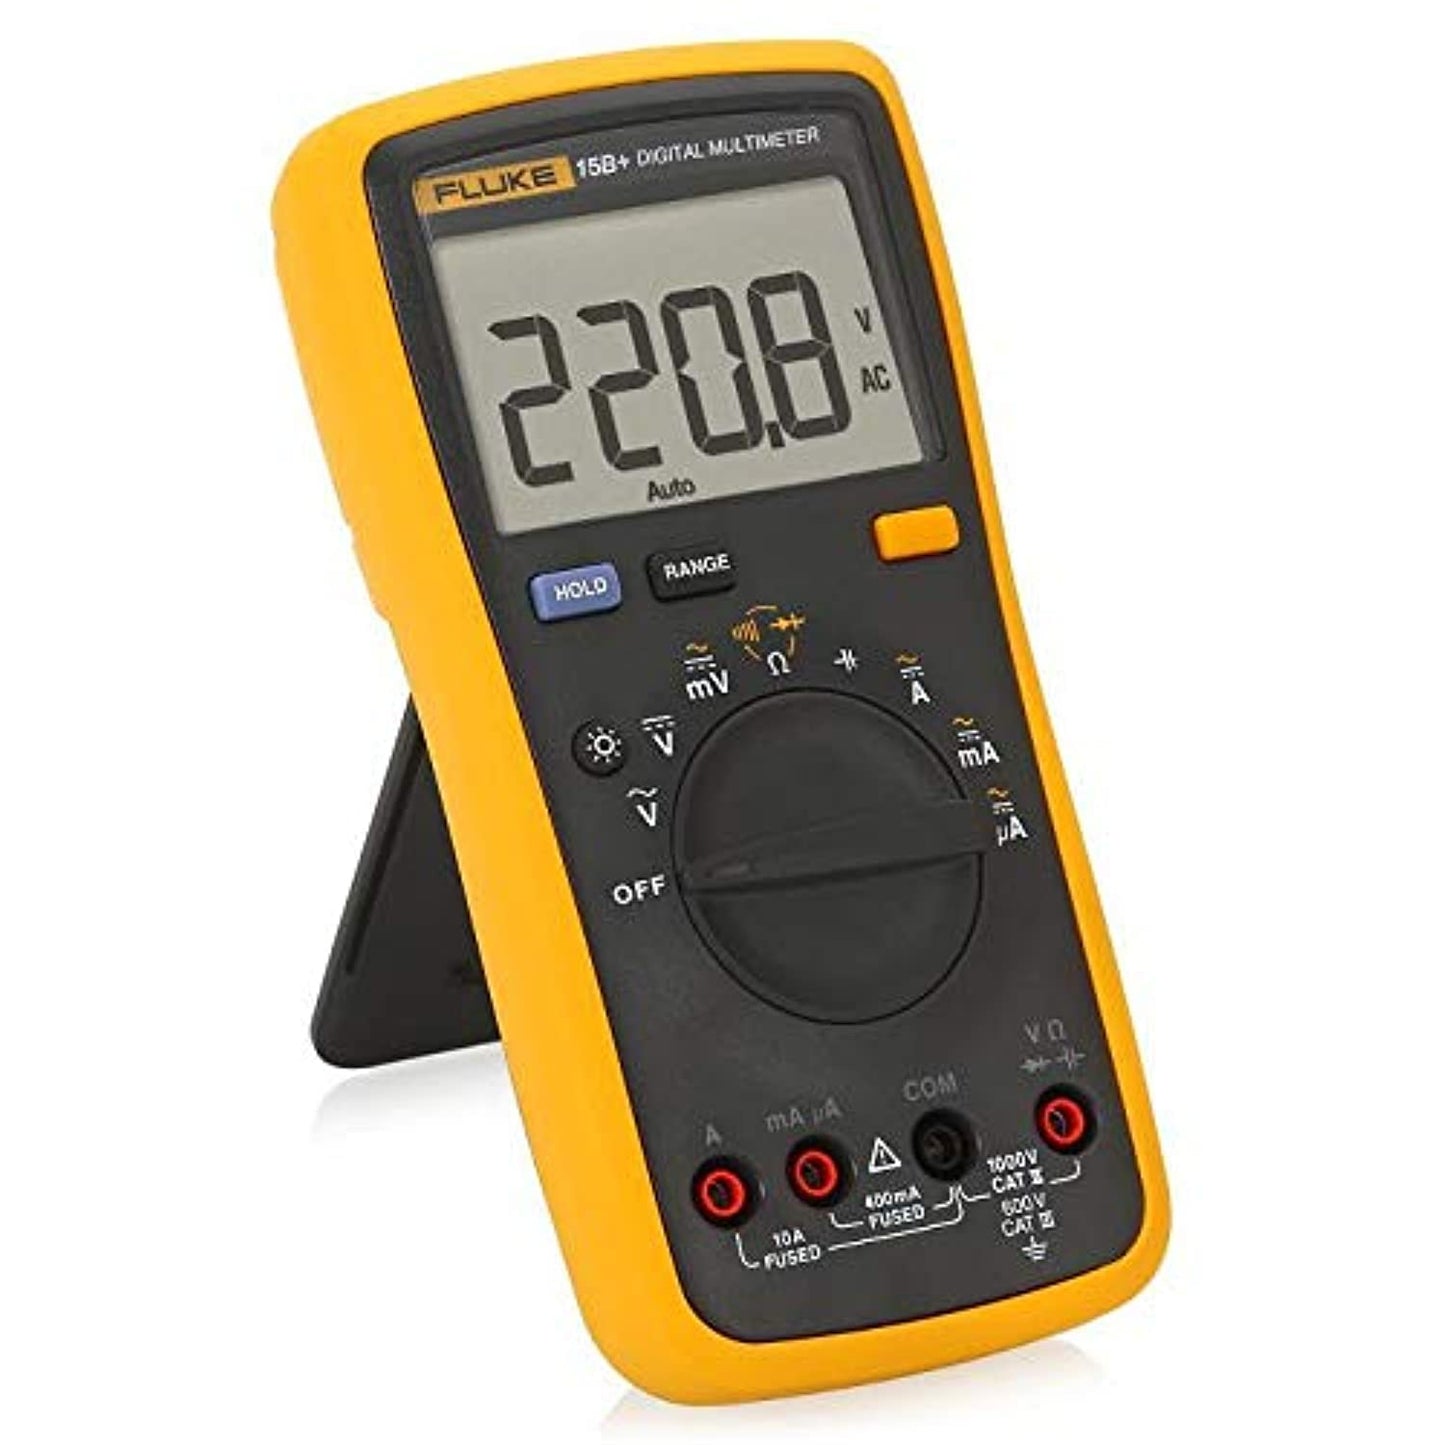 Your job requires that you have a rugged, reliable and accurate digital multimeter. The Fluke 15B+ digital multimeter does all that and more. Easy to use with one hand, even with gloves on, the Fluke 15B+ offers everything you need.